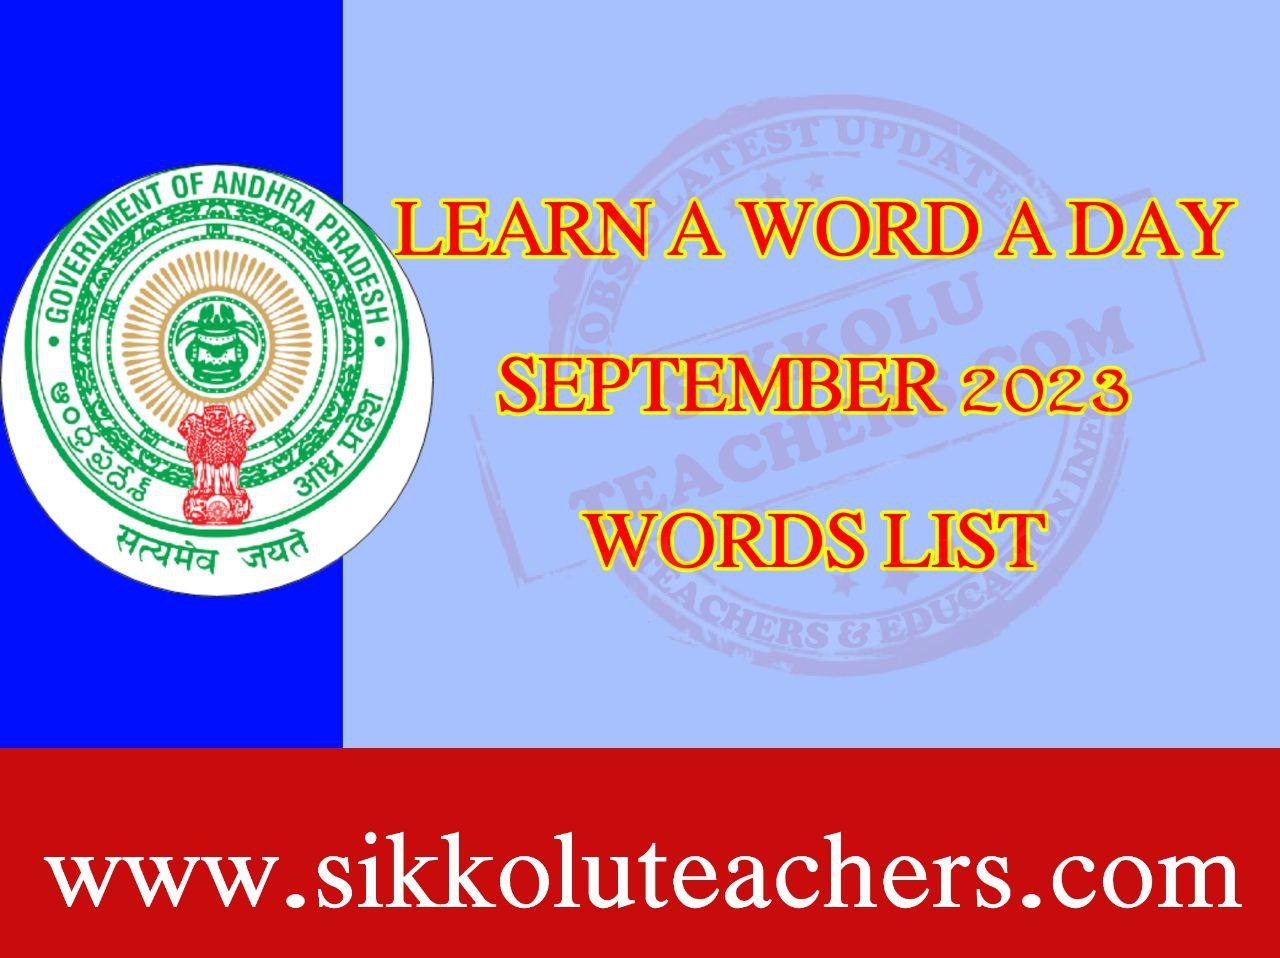 LEARN A WORD A DAY SEPTEMBER WORDS LIST 2023